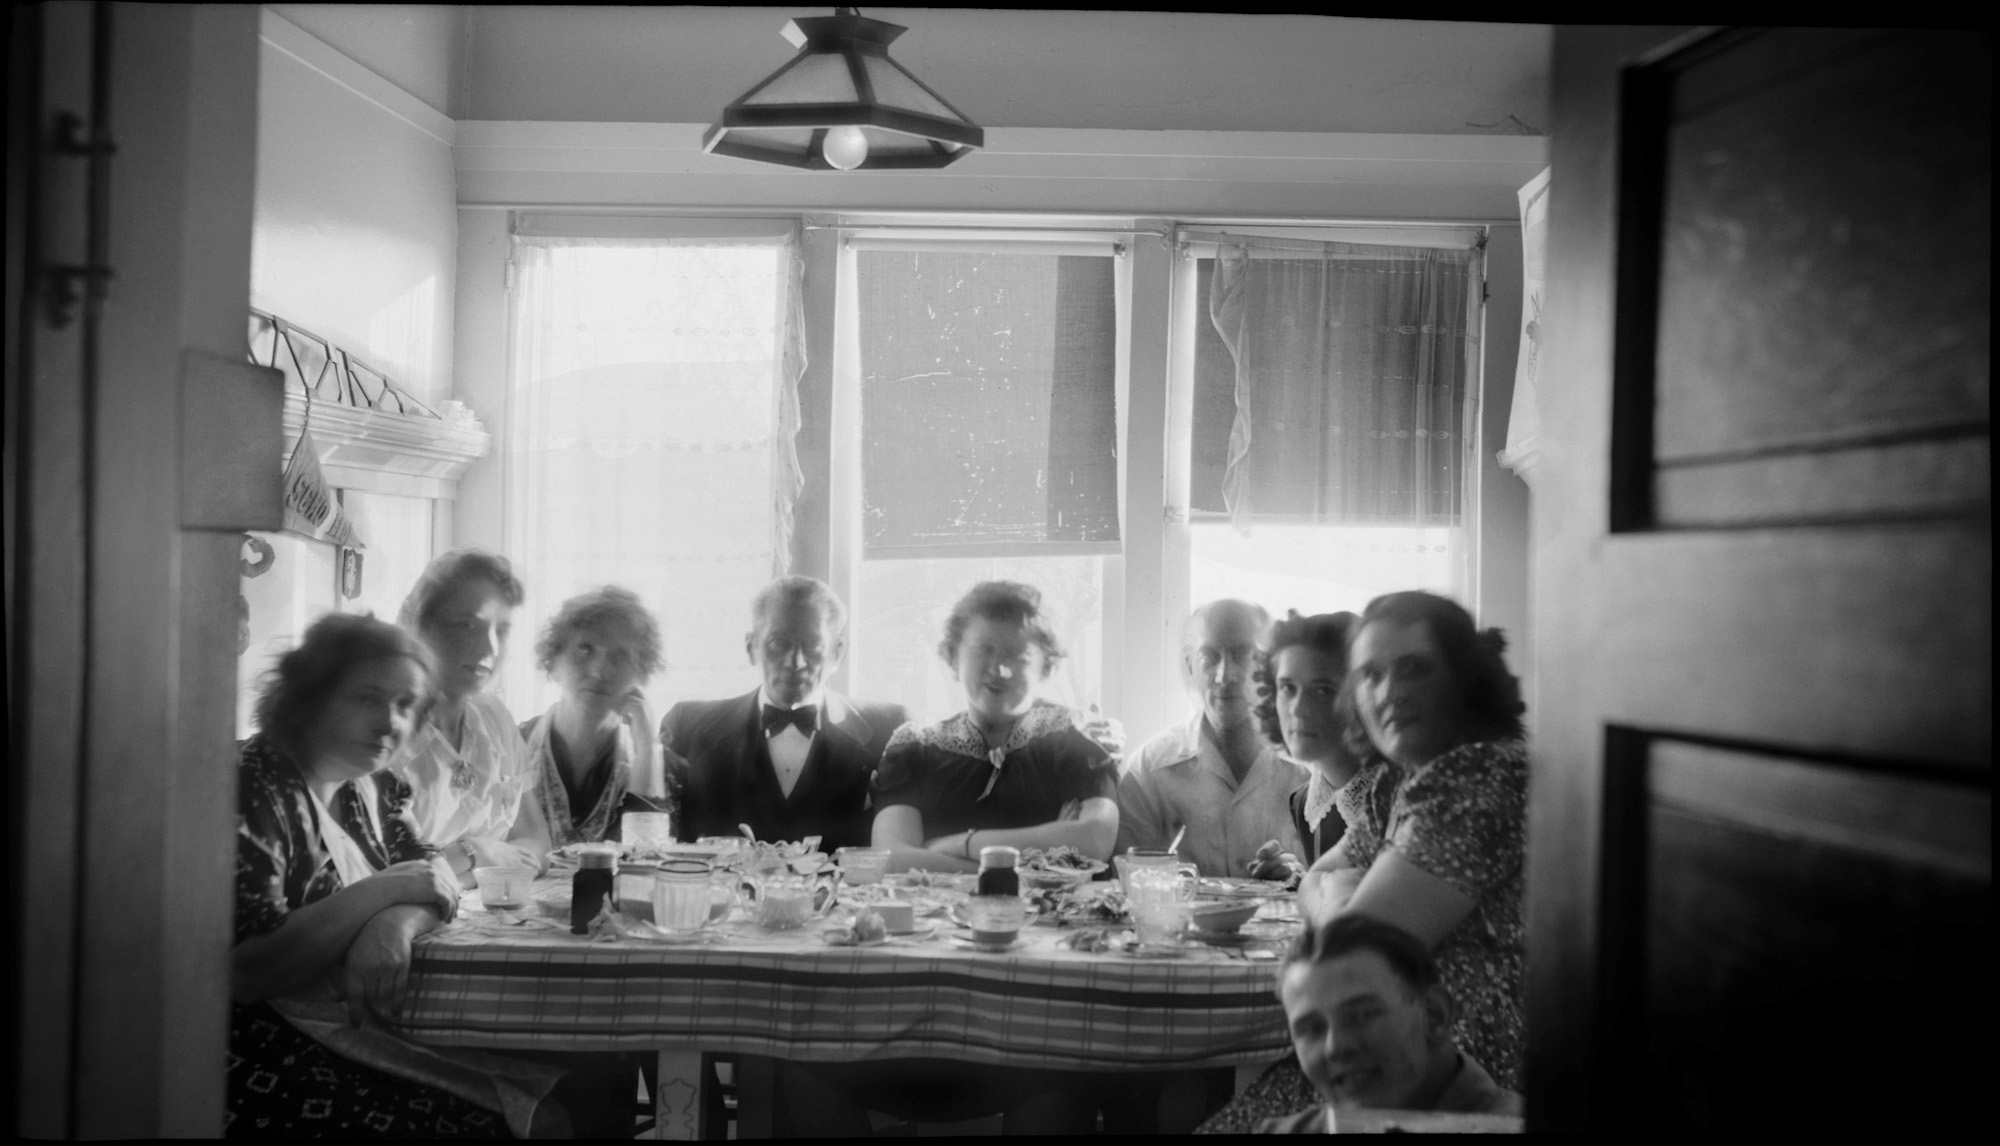 This is most likely southern California in the mid 1930s. Many of the faces are familiar from previous photos as friends and family of the Blisses. View full size.